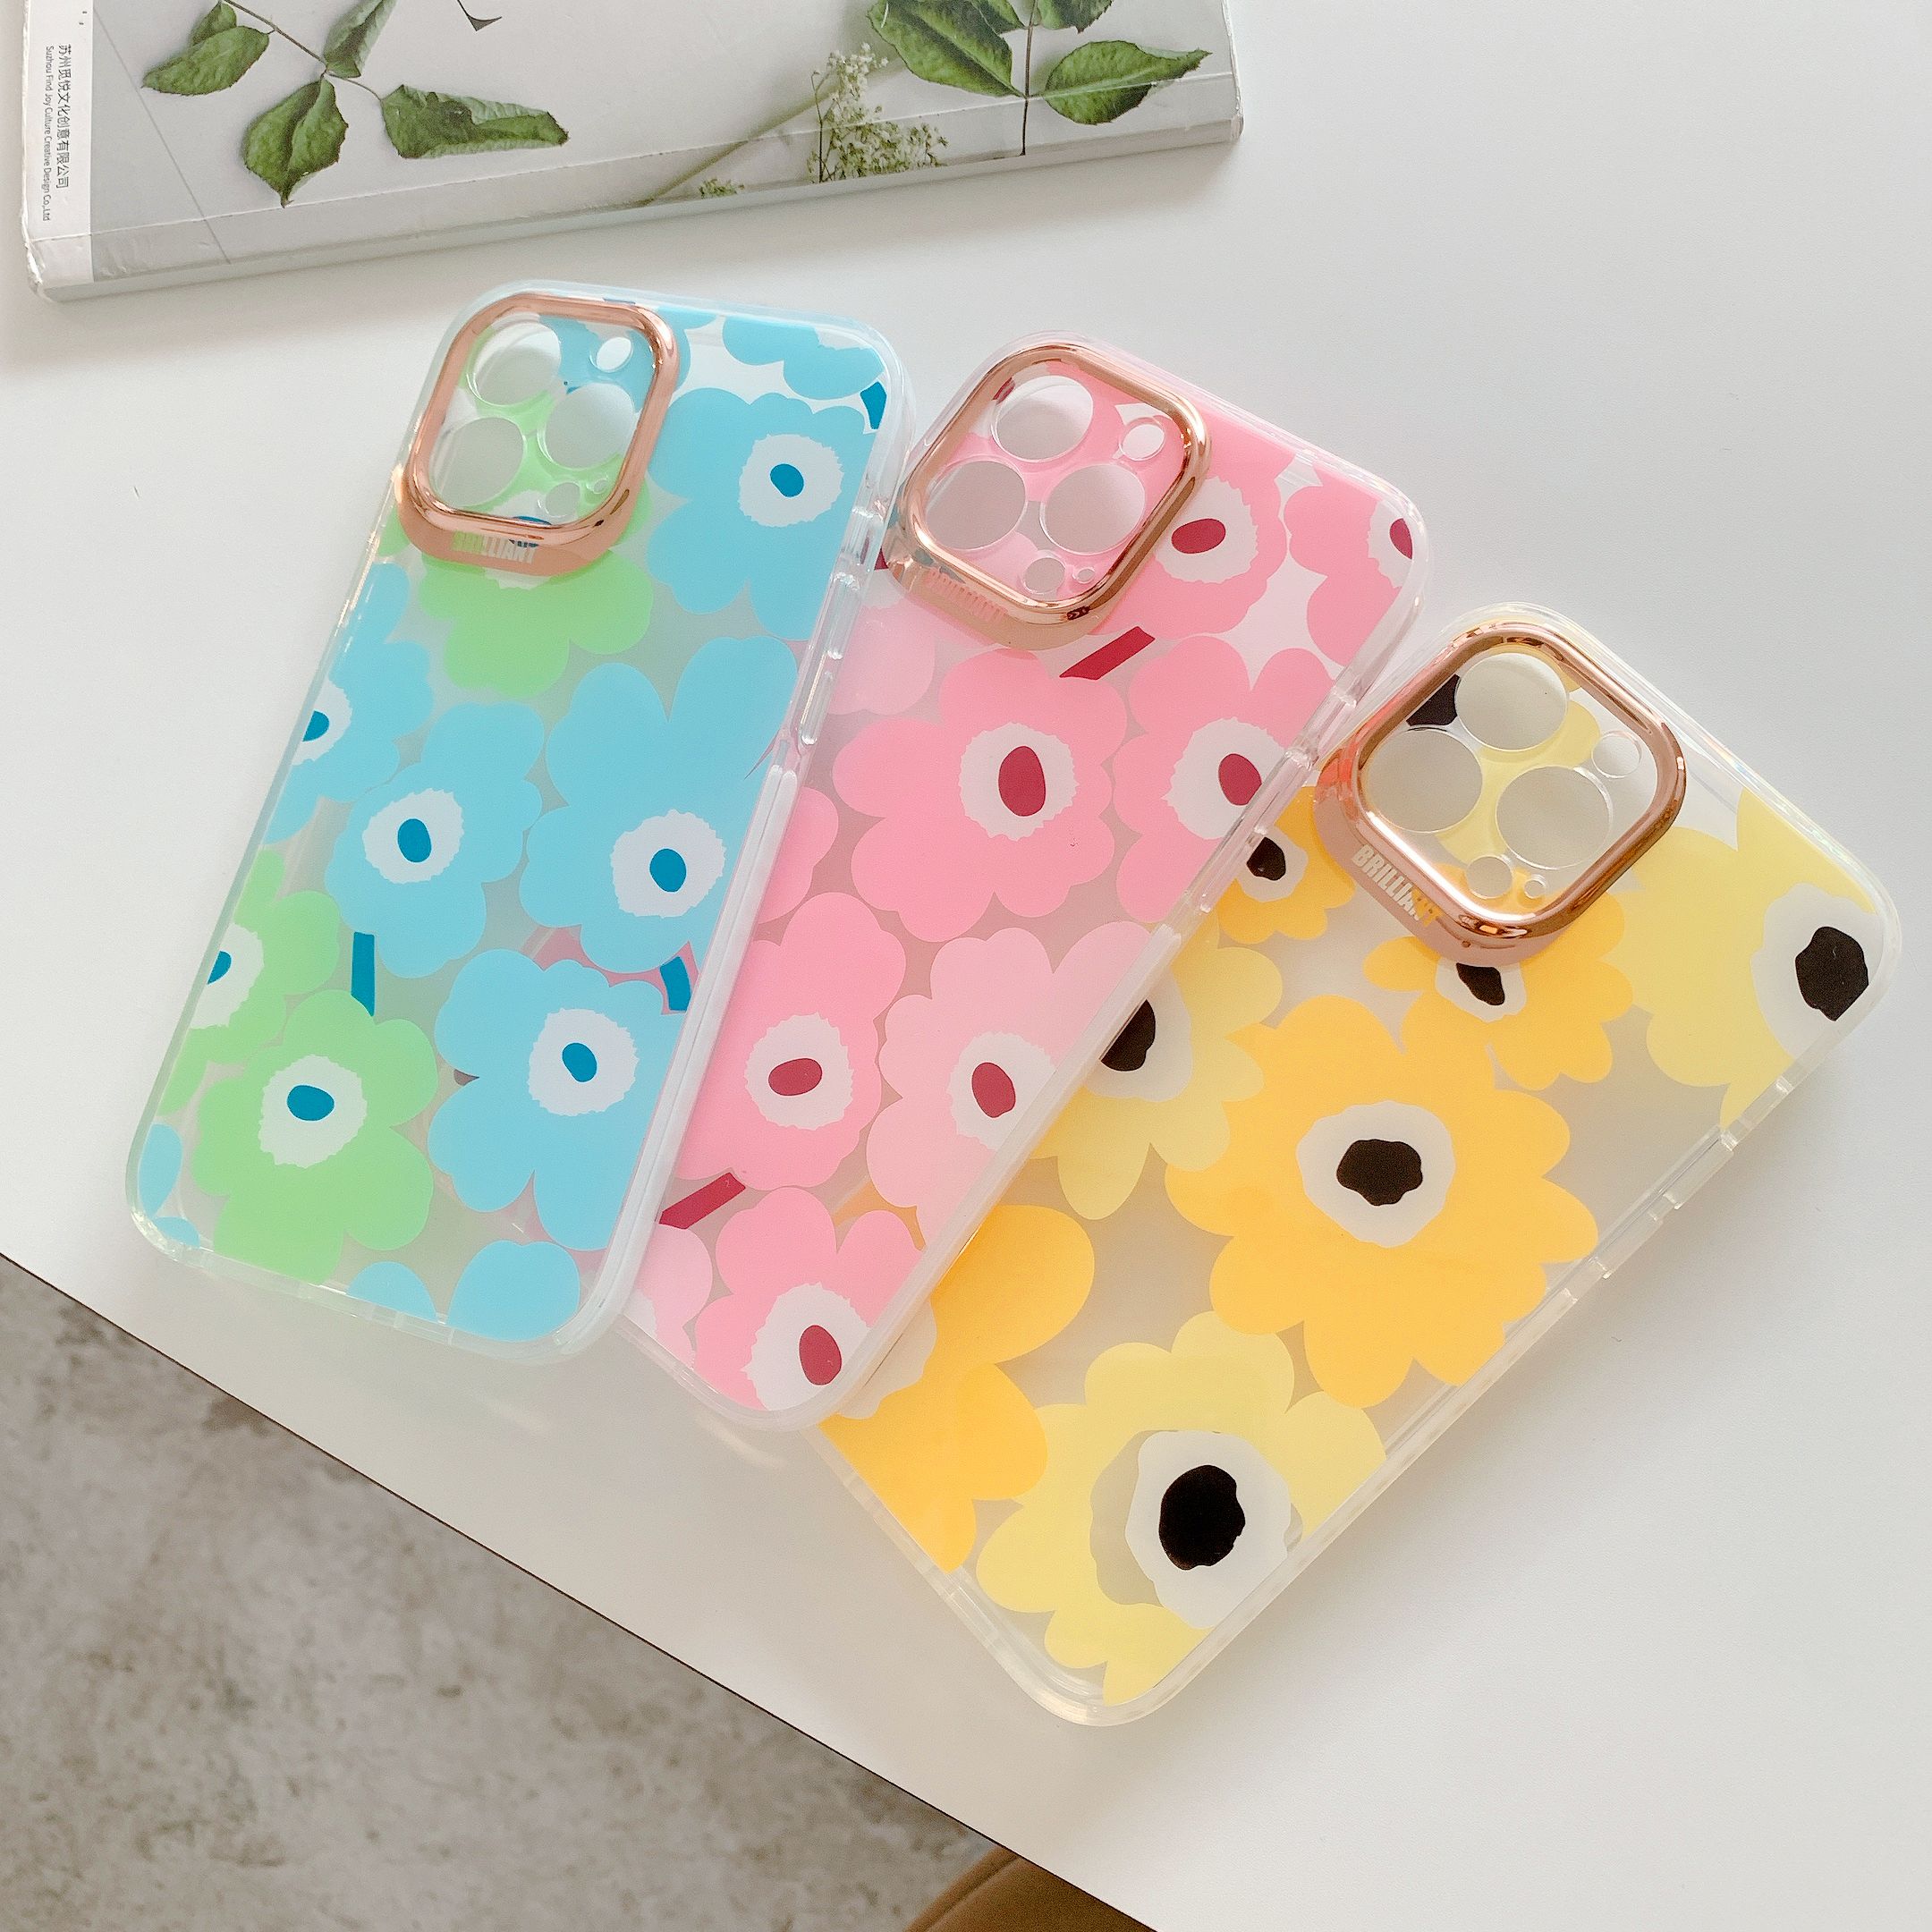 Pink, blue & yellow phone case